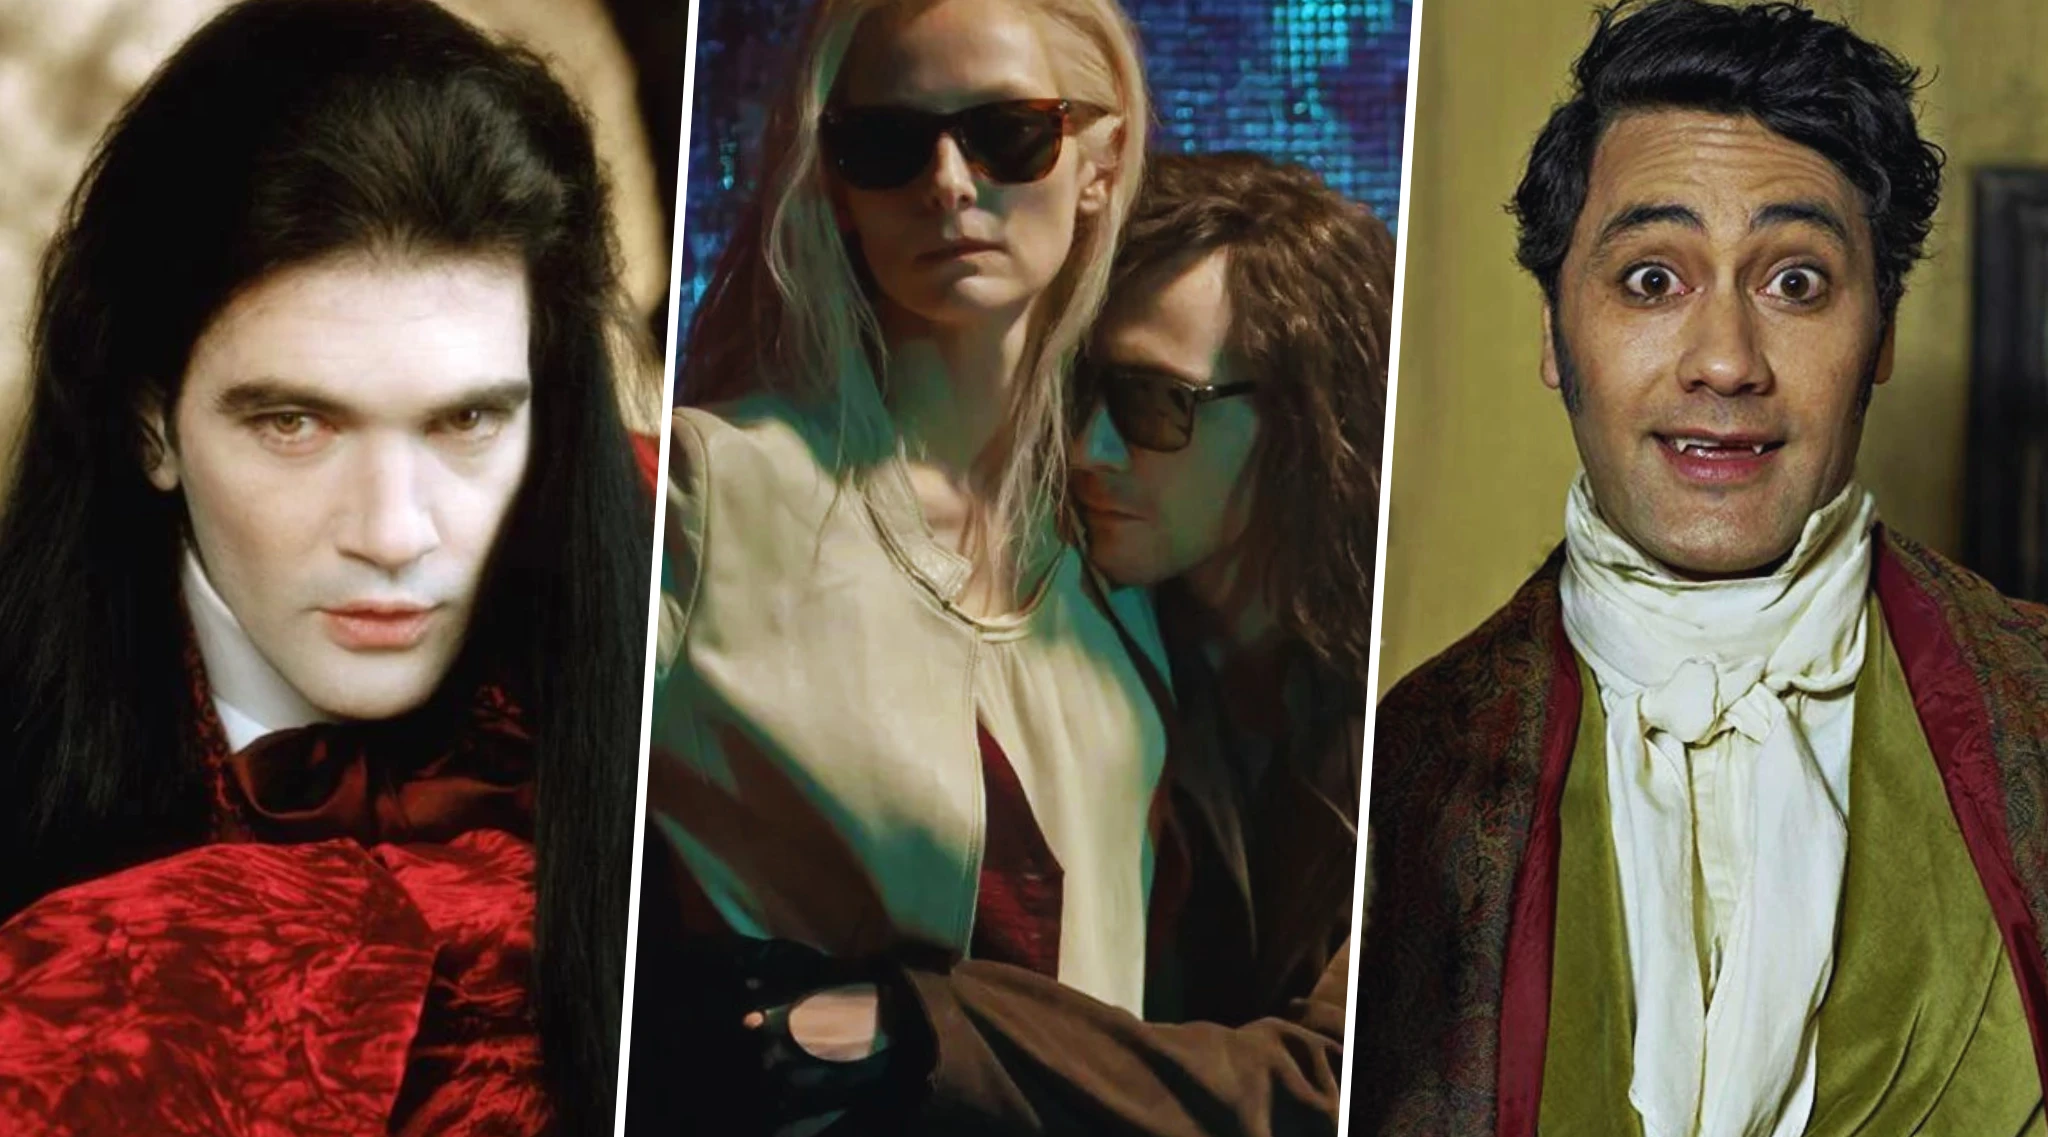 13 Vampire Movies to Sink Your Teeth Into